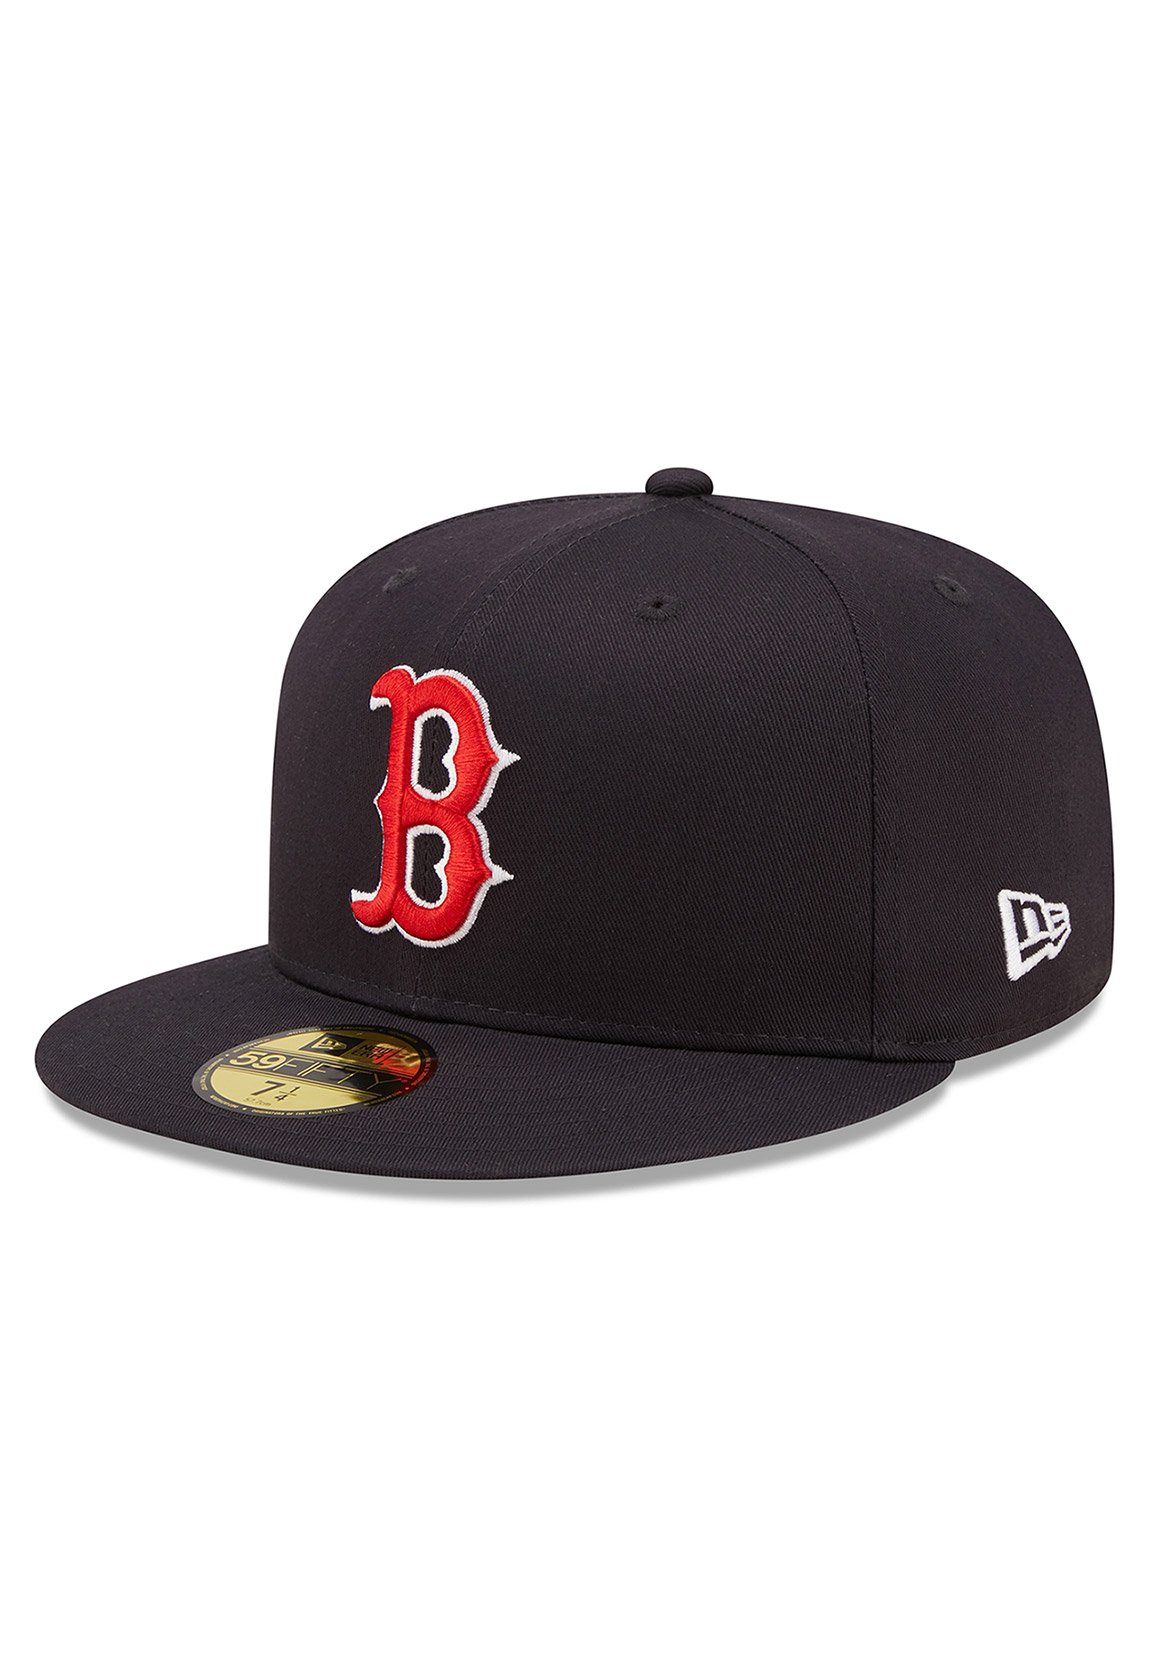 Era Cap Side New RED SOX Dunkelblau Patch Cap Fitted BOSTON New 59Fifty